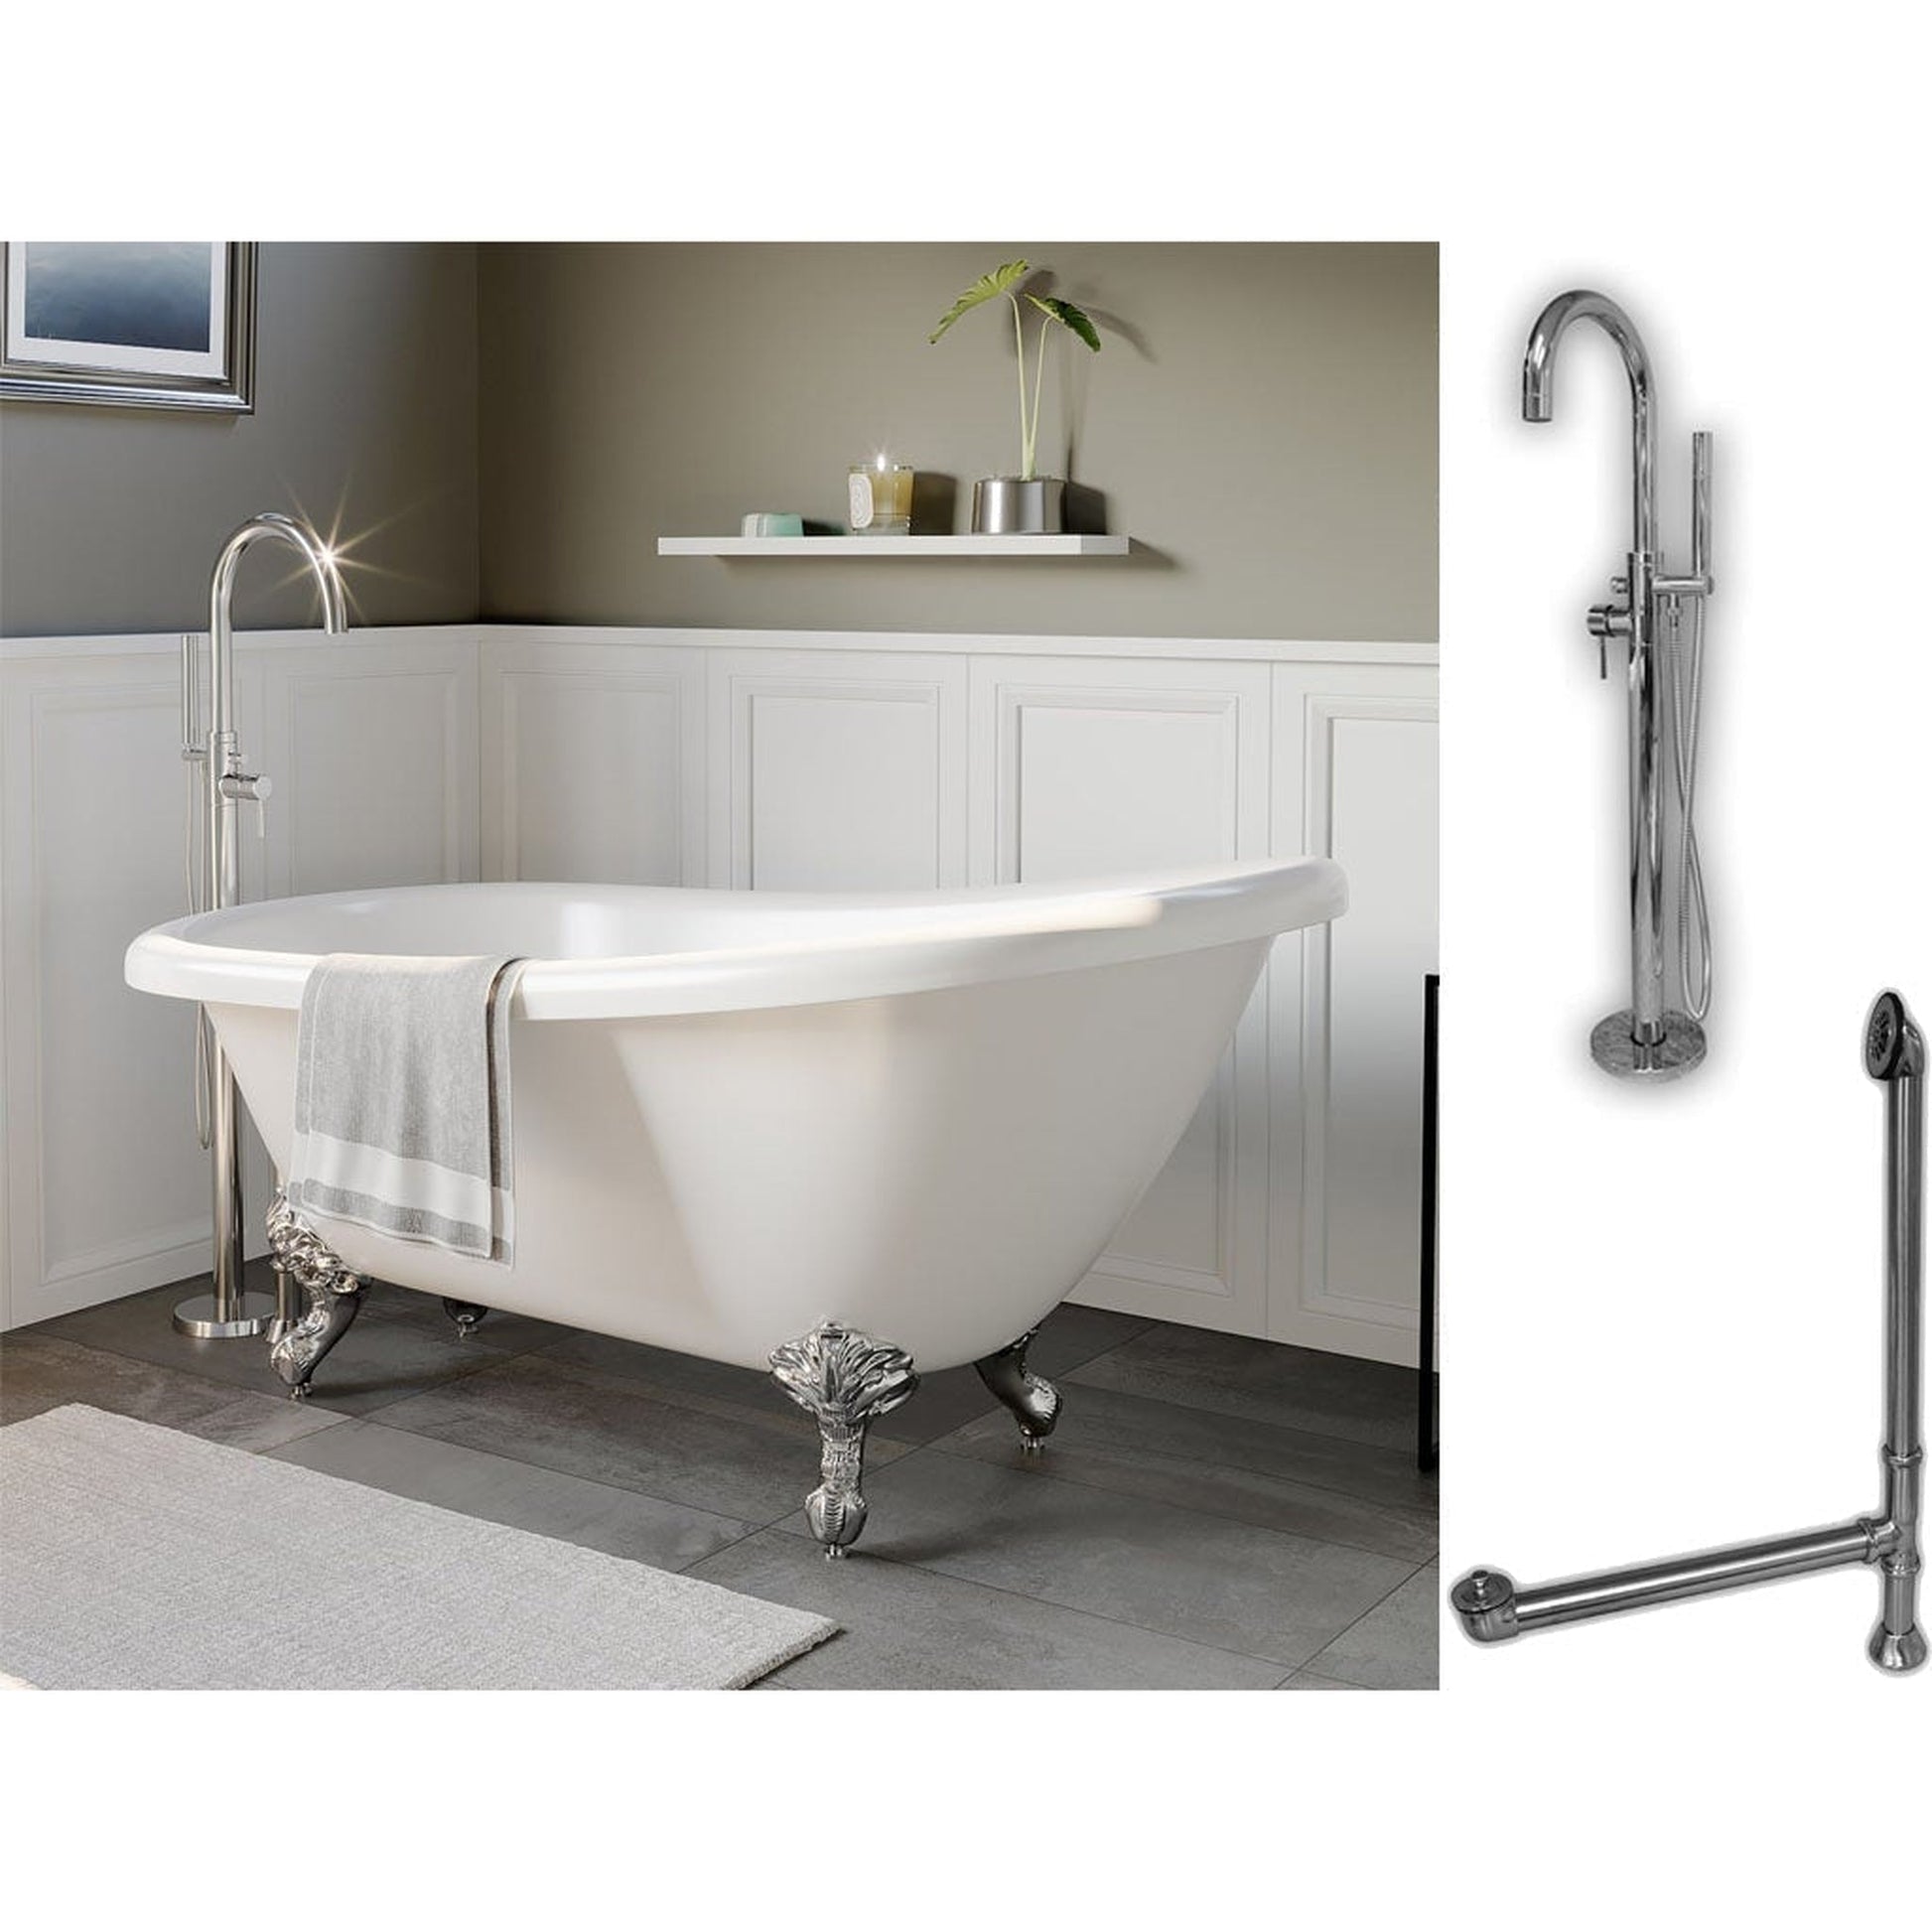 Cambridge Plumbing 61" White Acrylic Single Slipper Clawfeet Bathtub With No Deck Holes And Complete Plumbing Package Including Modern Floor Mounted Faucet, Supply Lines, Drain And Overflow Assembly In Polished Chrome